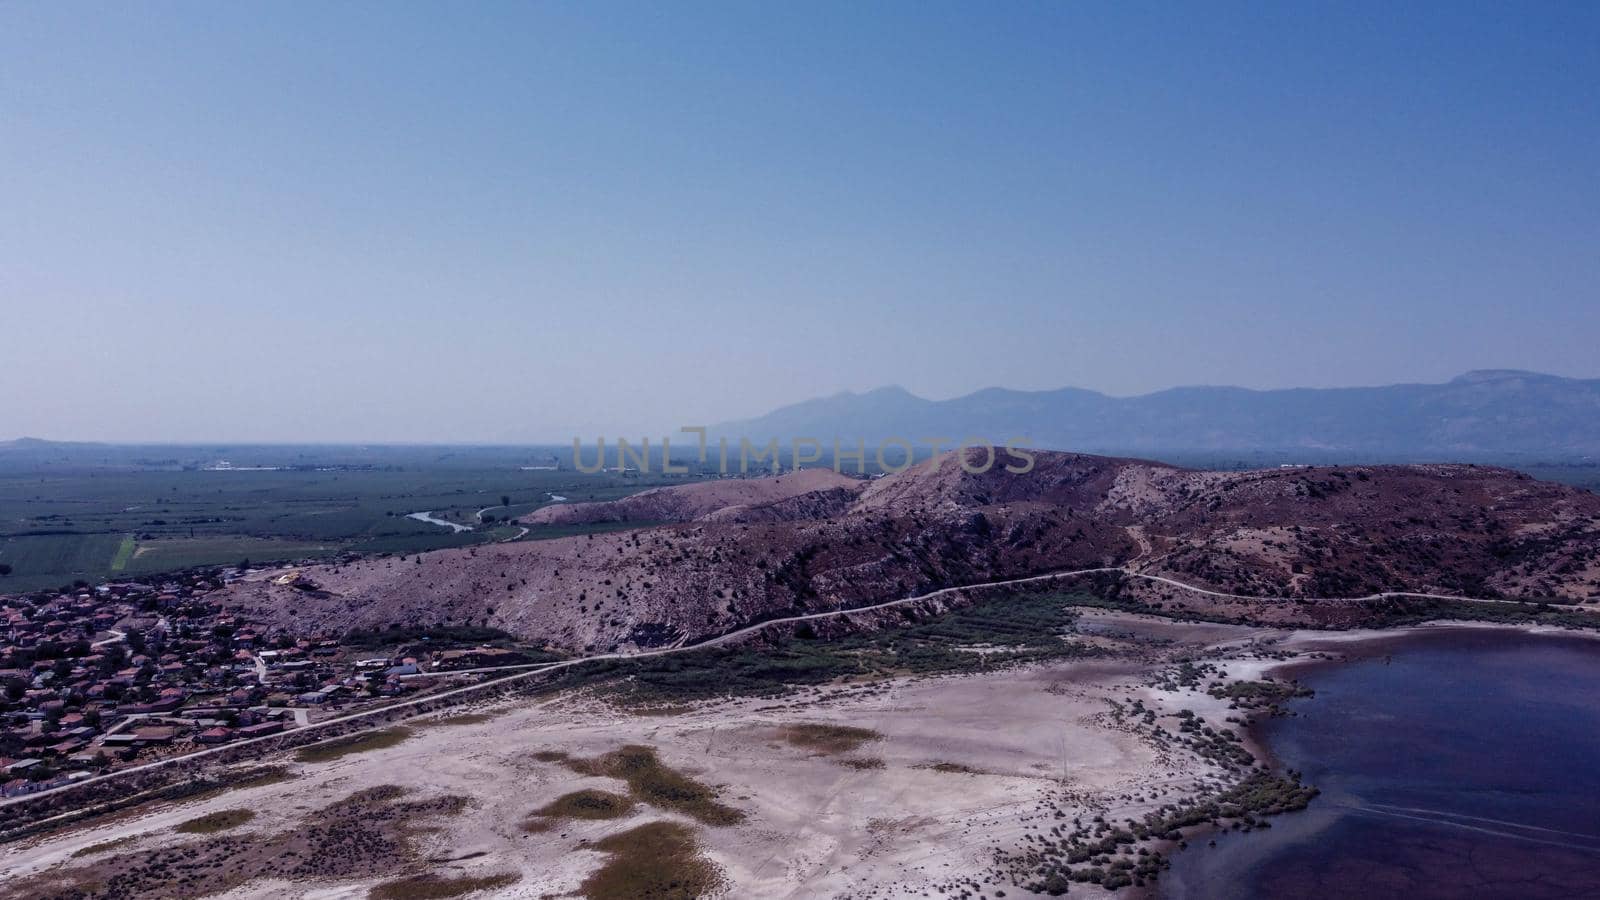 a very good looking horizontal landscape drone shoot with vivid colors - there is lake and blue sky red color dominant. photo has taken at bafa lake in turkey.